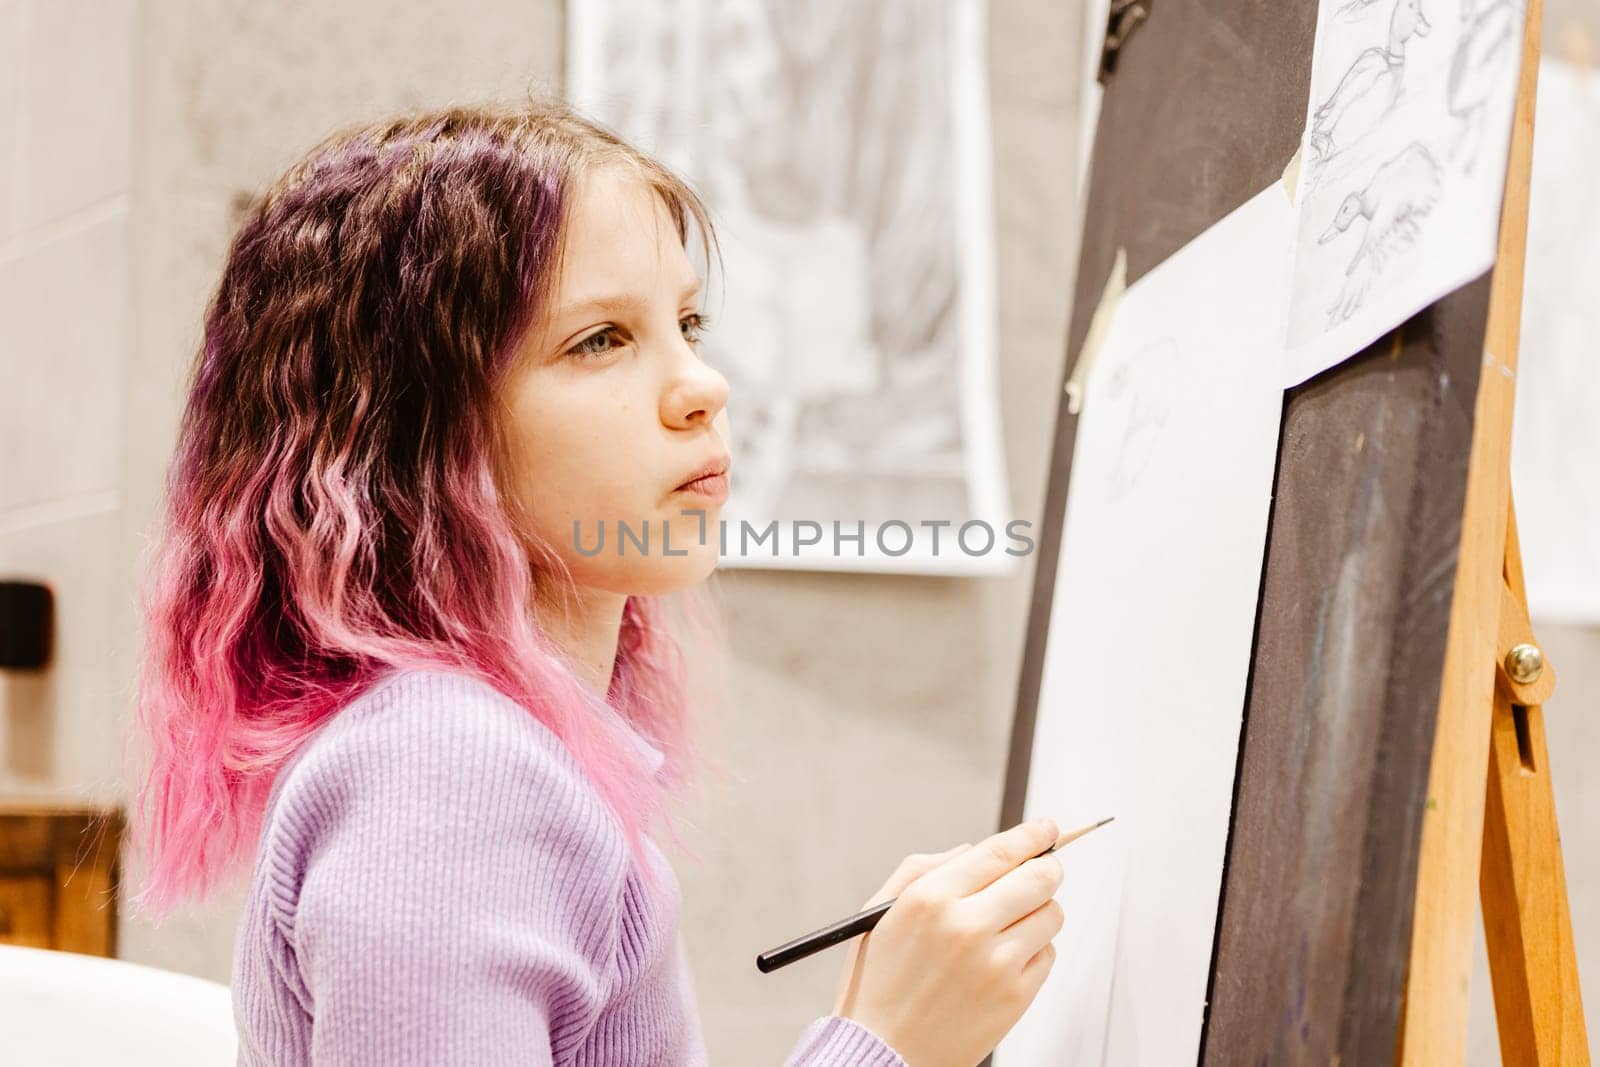 Girl 11 years old craftswoman are painting on canvas in studio standing in front of easel. Portrait of a girl painting during an art class